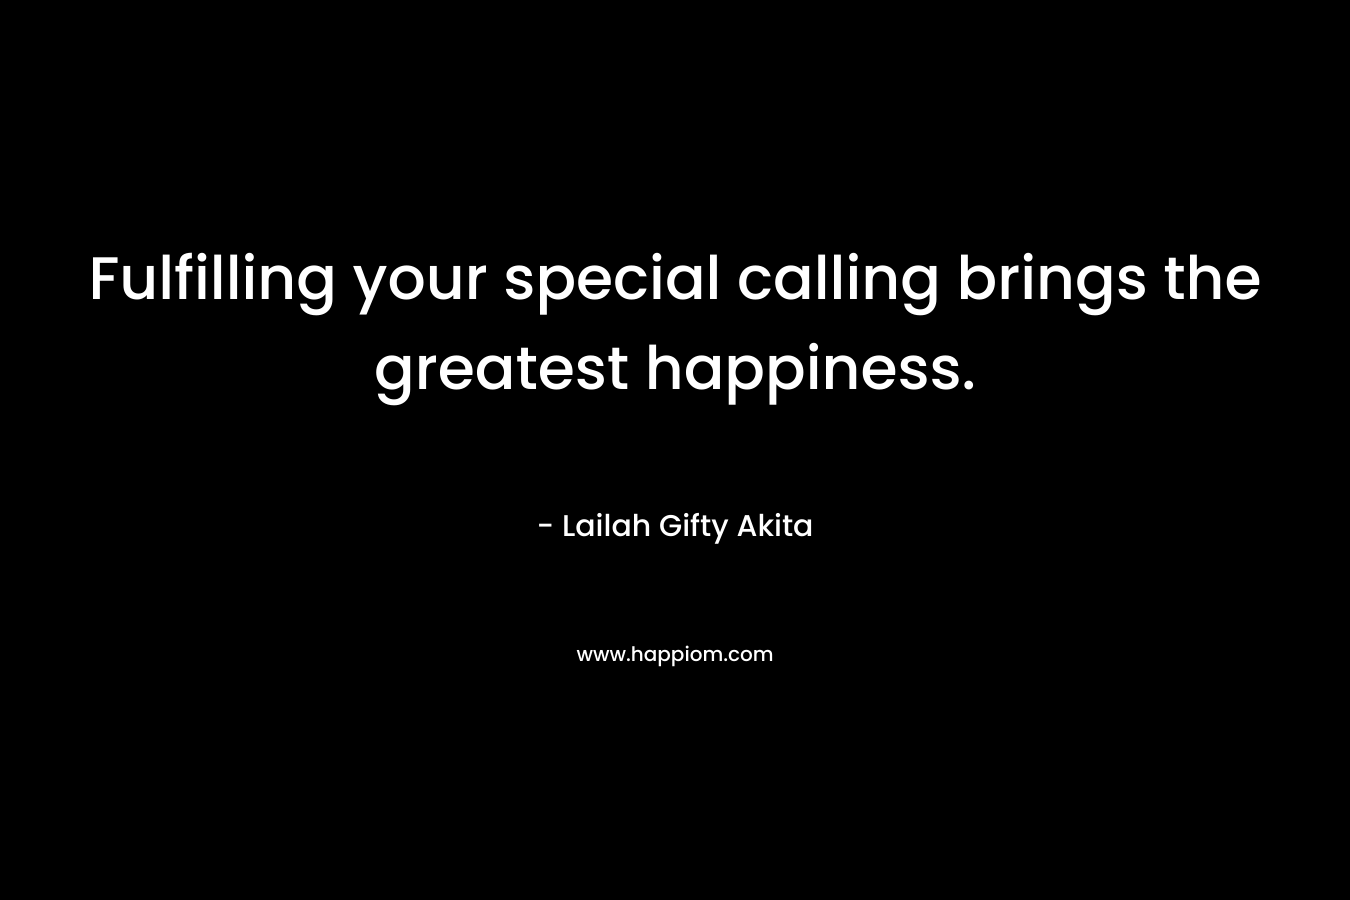 Fulfilling your special calling brings the greatest happiness.